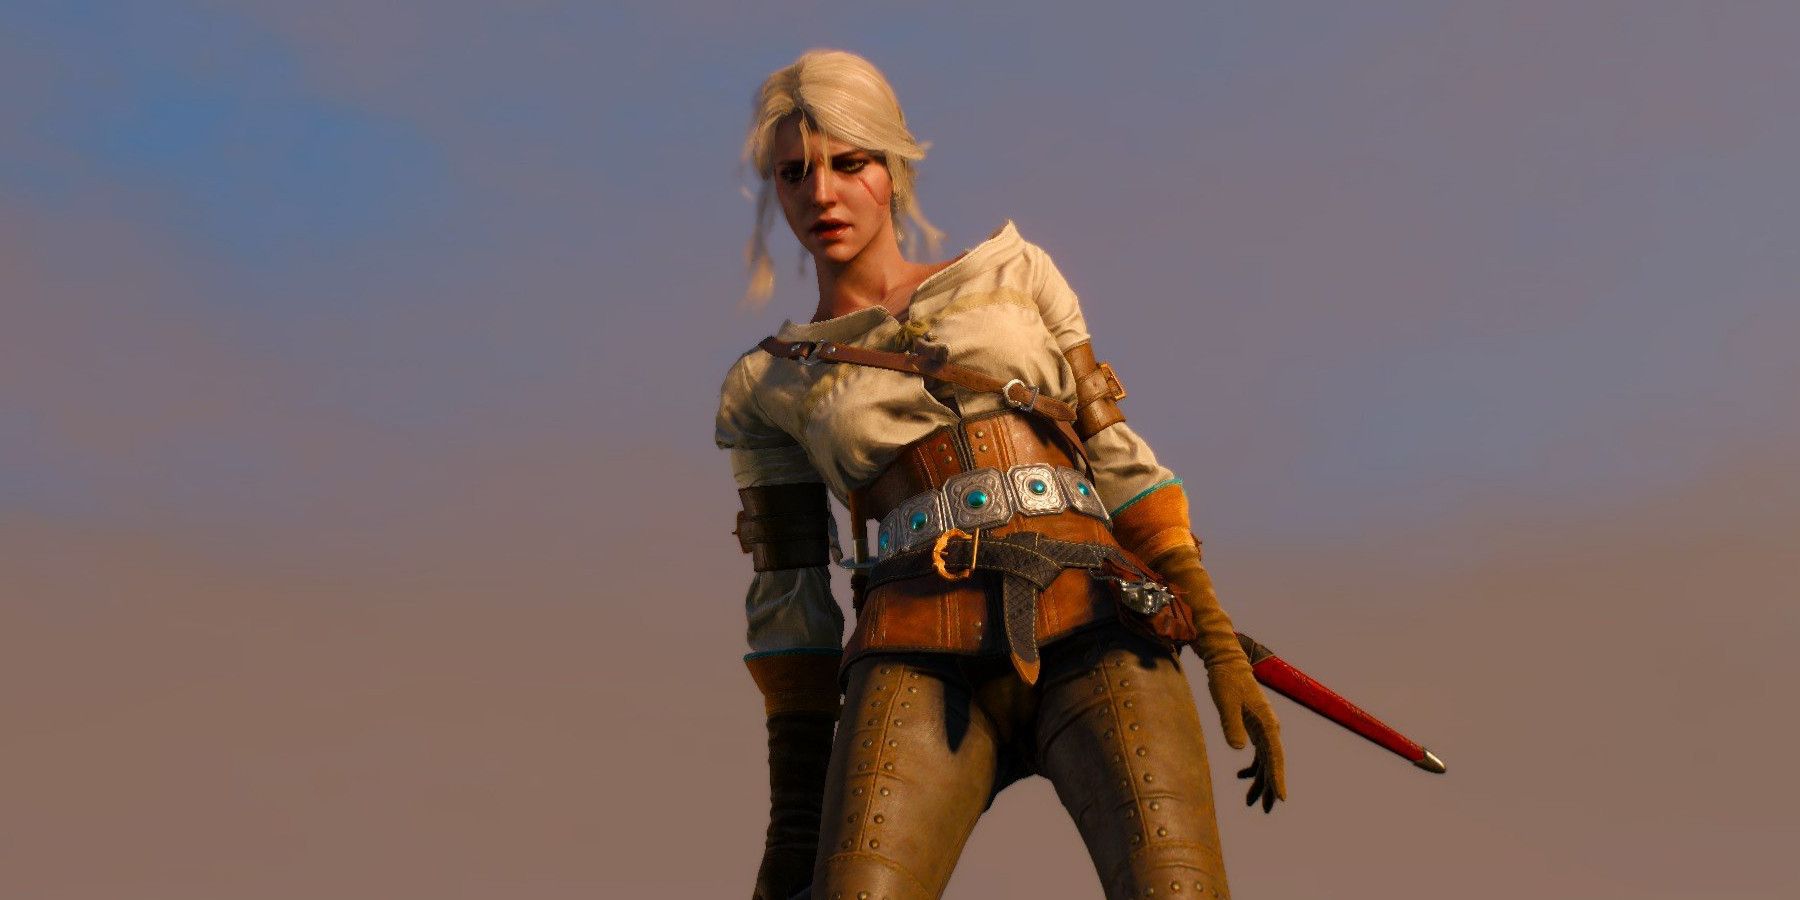 ciri the witcher 3 standing with sword drawn